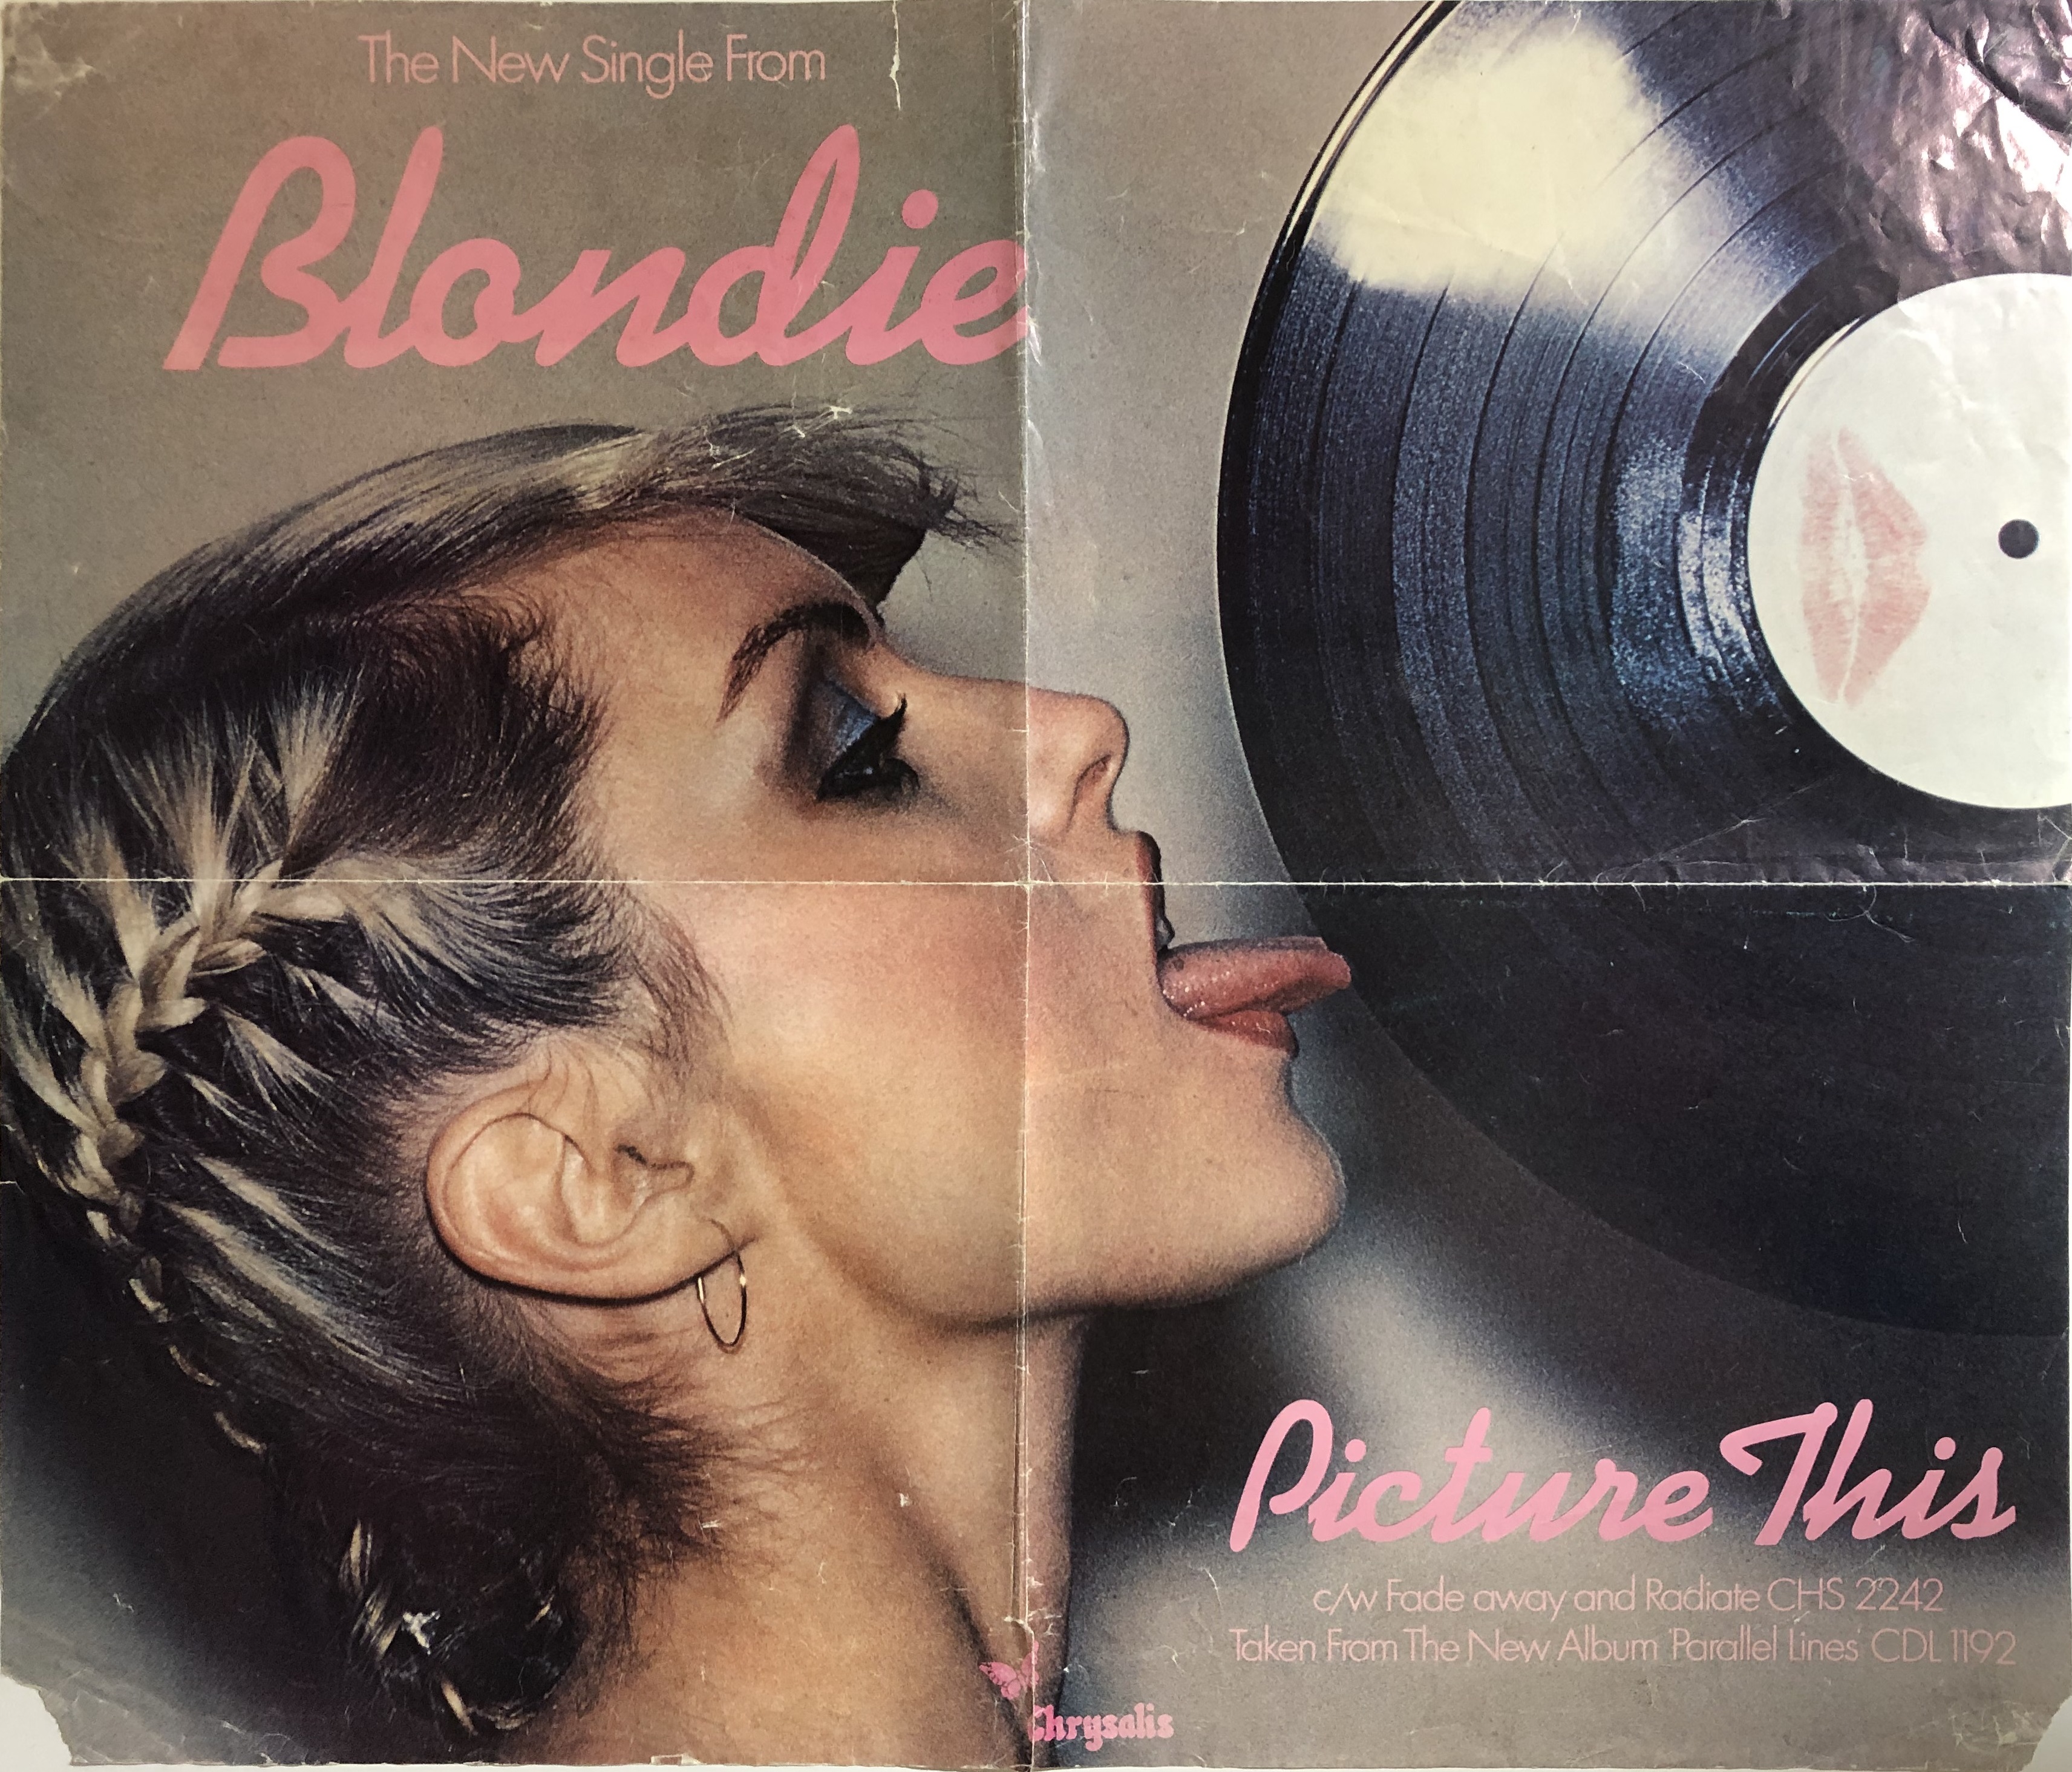 BLONDIE POSTER. A folded 1978 Chrysalis promo poster for Blondie's 'Picture This'.